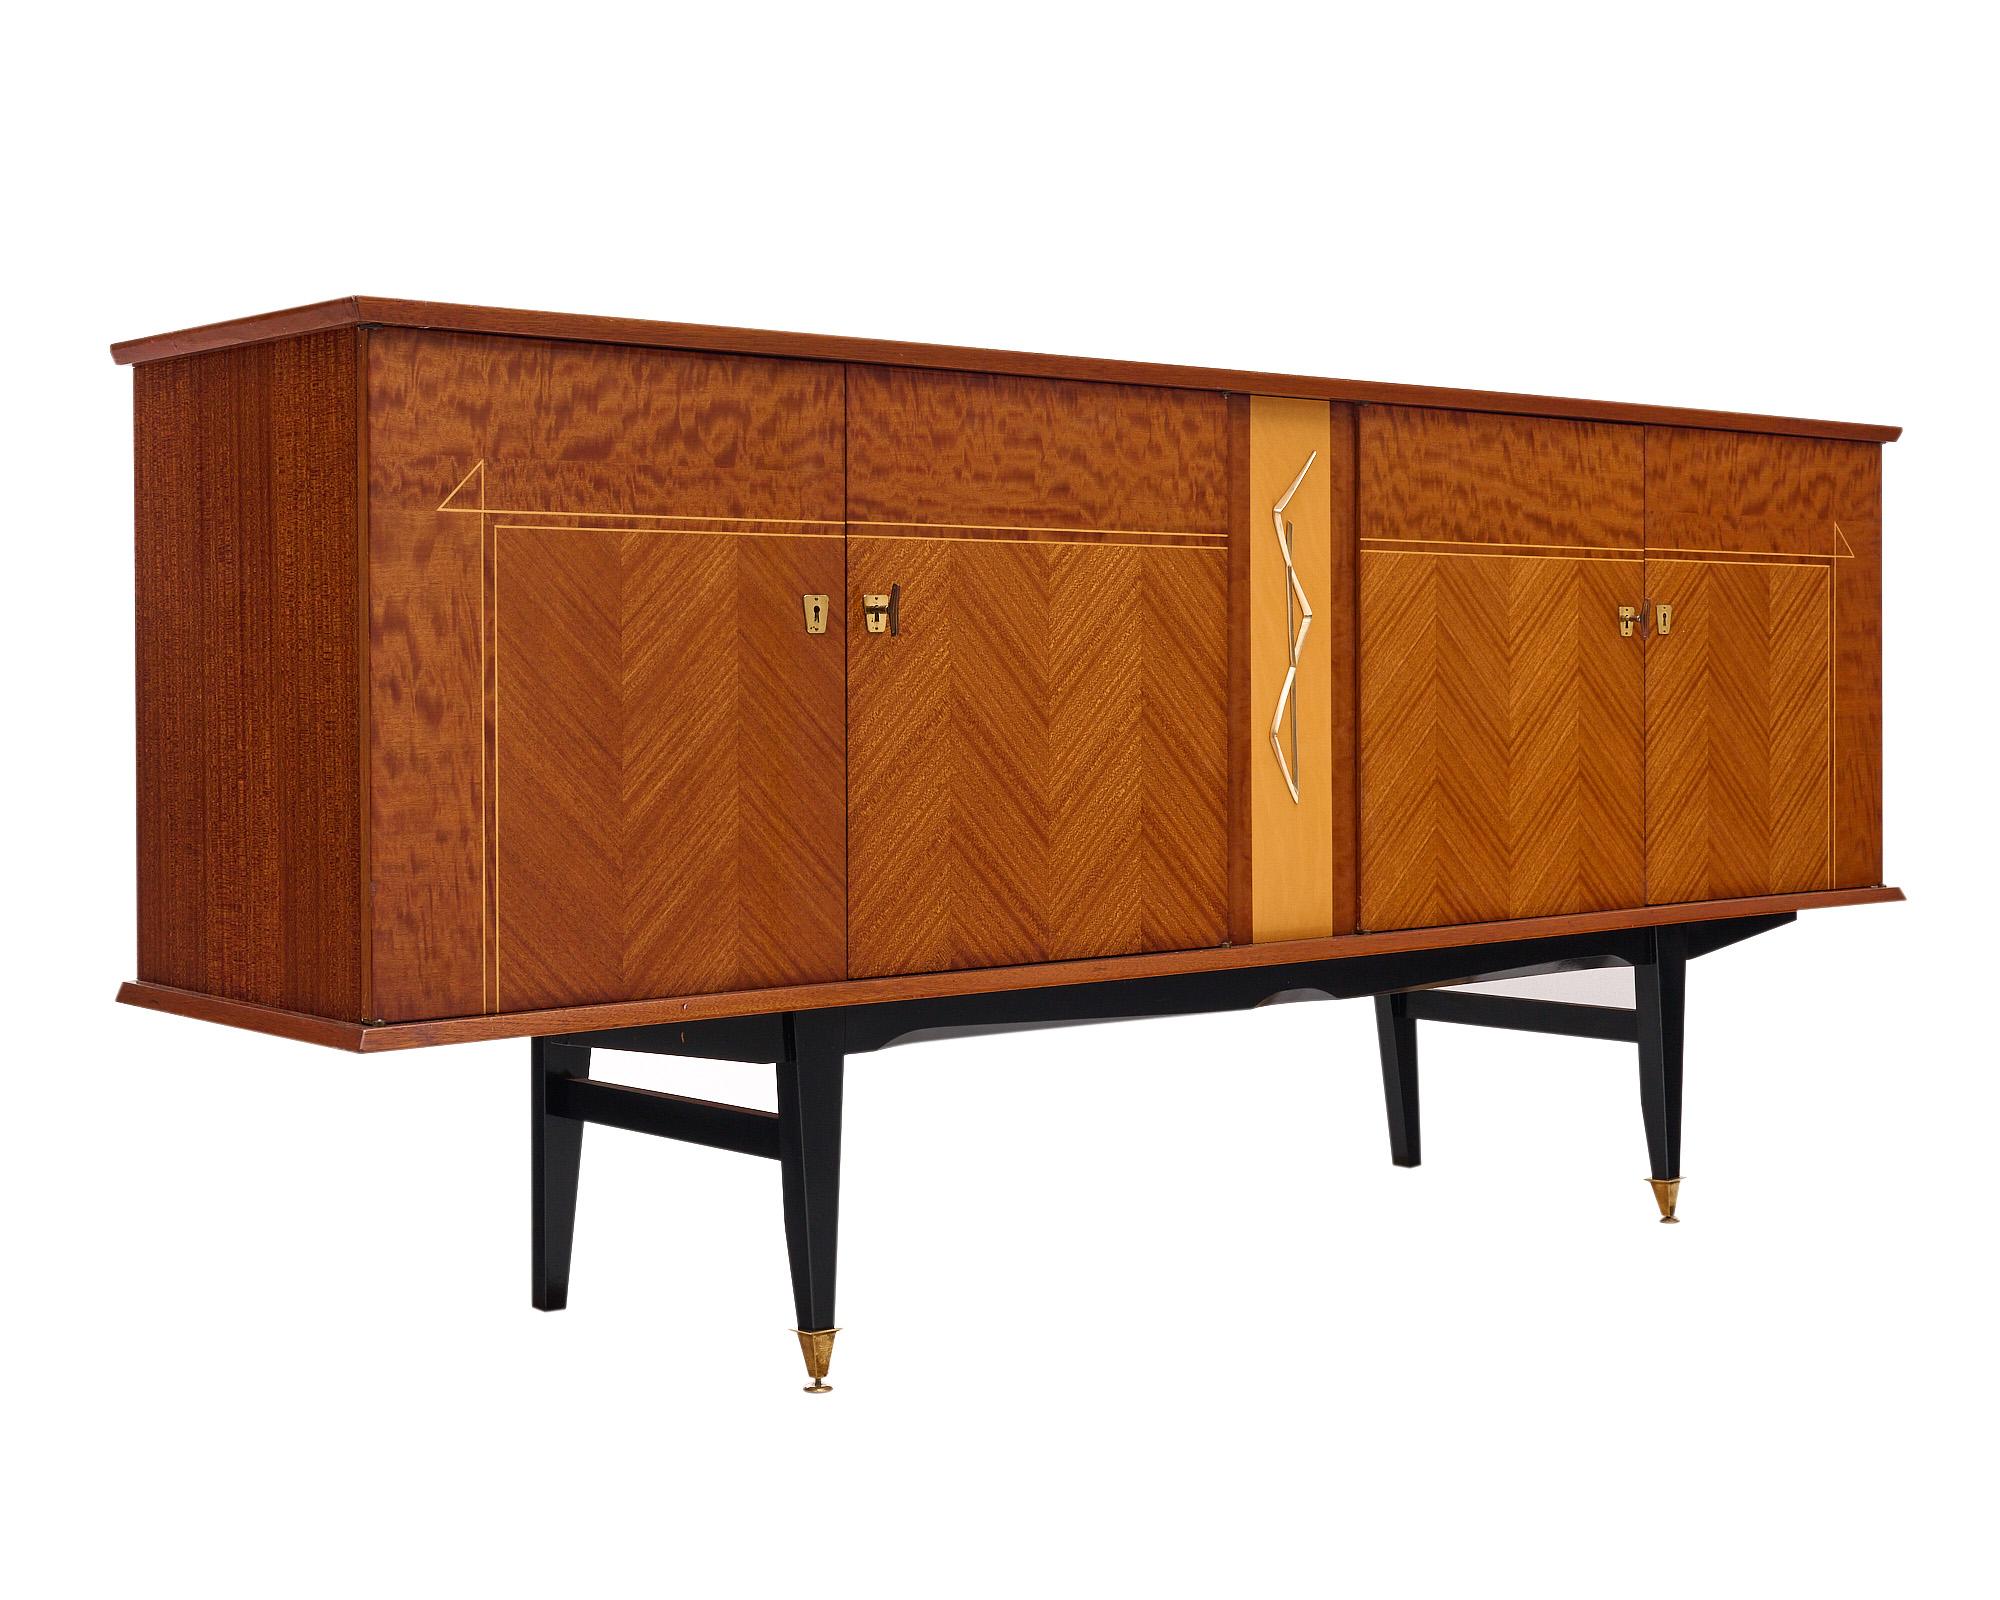 Mid-Century style buffet from France made with an alternating rosewood parquetry and burled rosewood veneer on the façade. The four doors each open to individual interior cabinets with shelves. The brass hardware and décor are all original to the